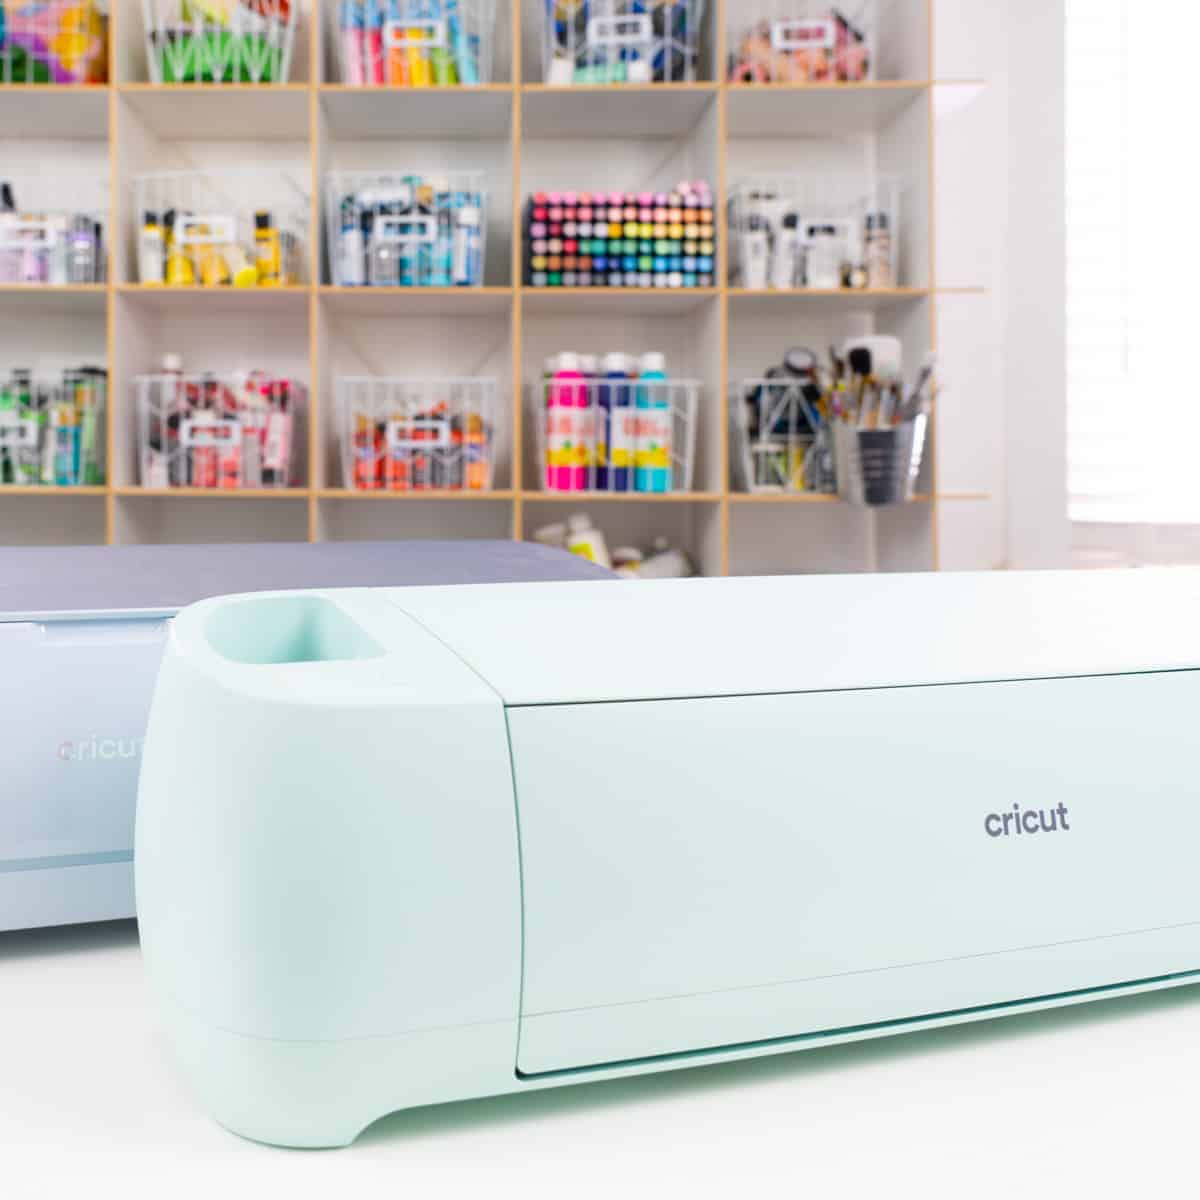 Explore Air 2 vs Cricut Explore 3: Which Is Right For Me? - Color Me Crafty